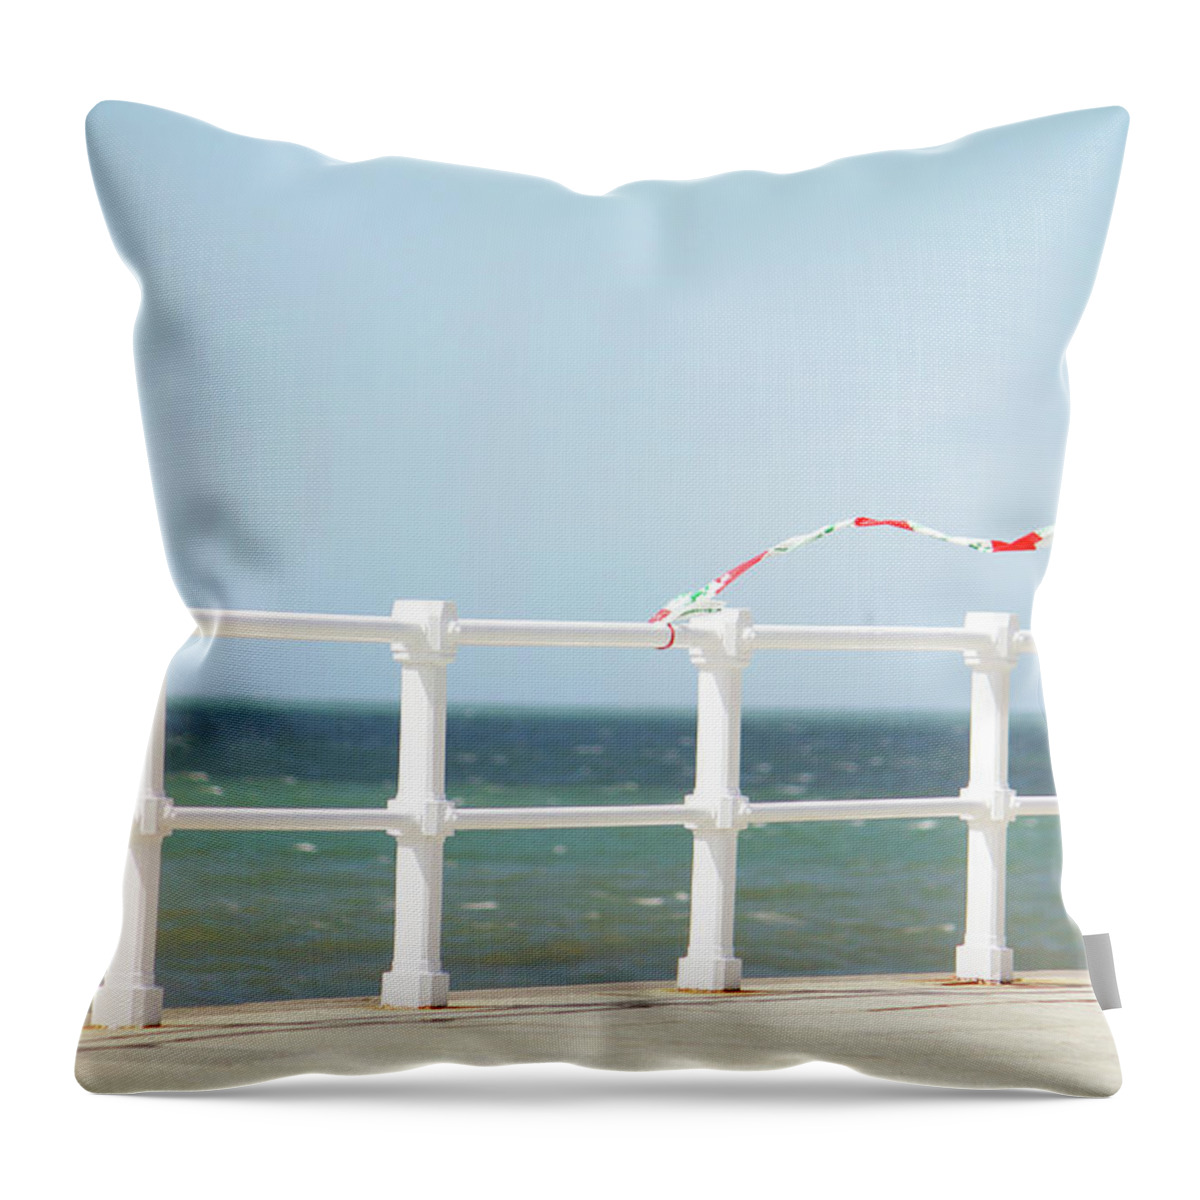 Wind Throw Pillow featuring the photograph Windy Day In Gijon by Fernando Trabanco Fotografía